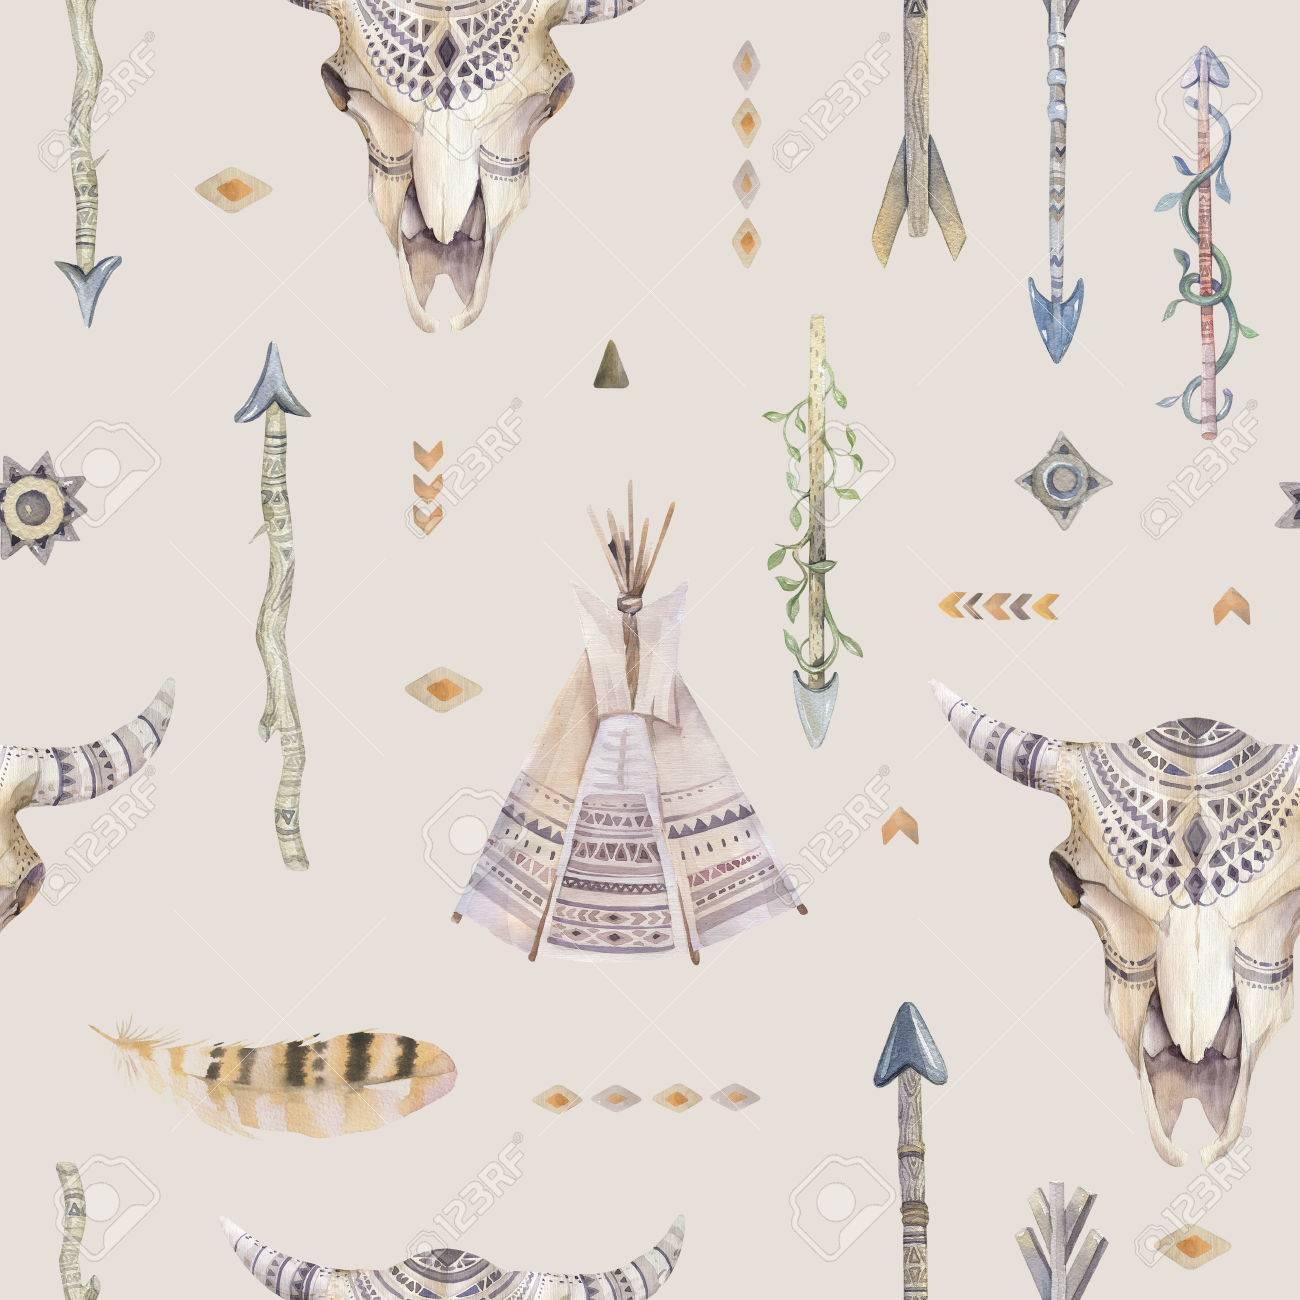 Free download Watercolor Boho Seamless Pattern With Teepee Arrows